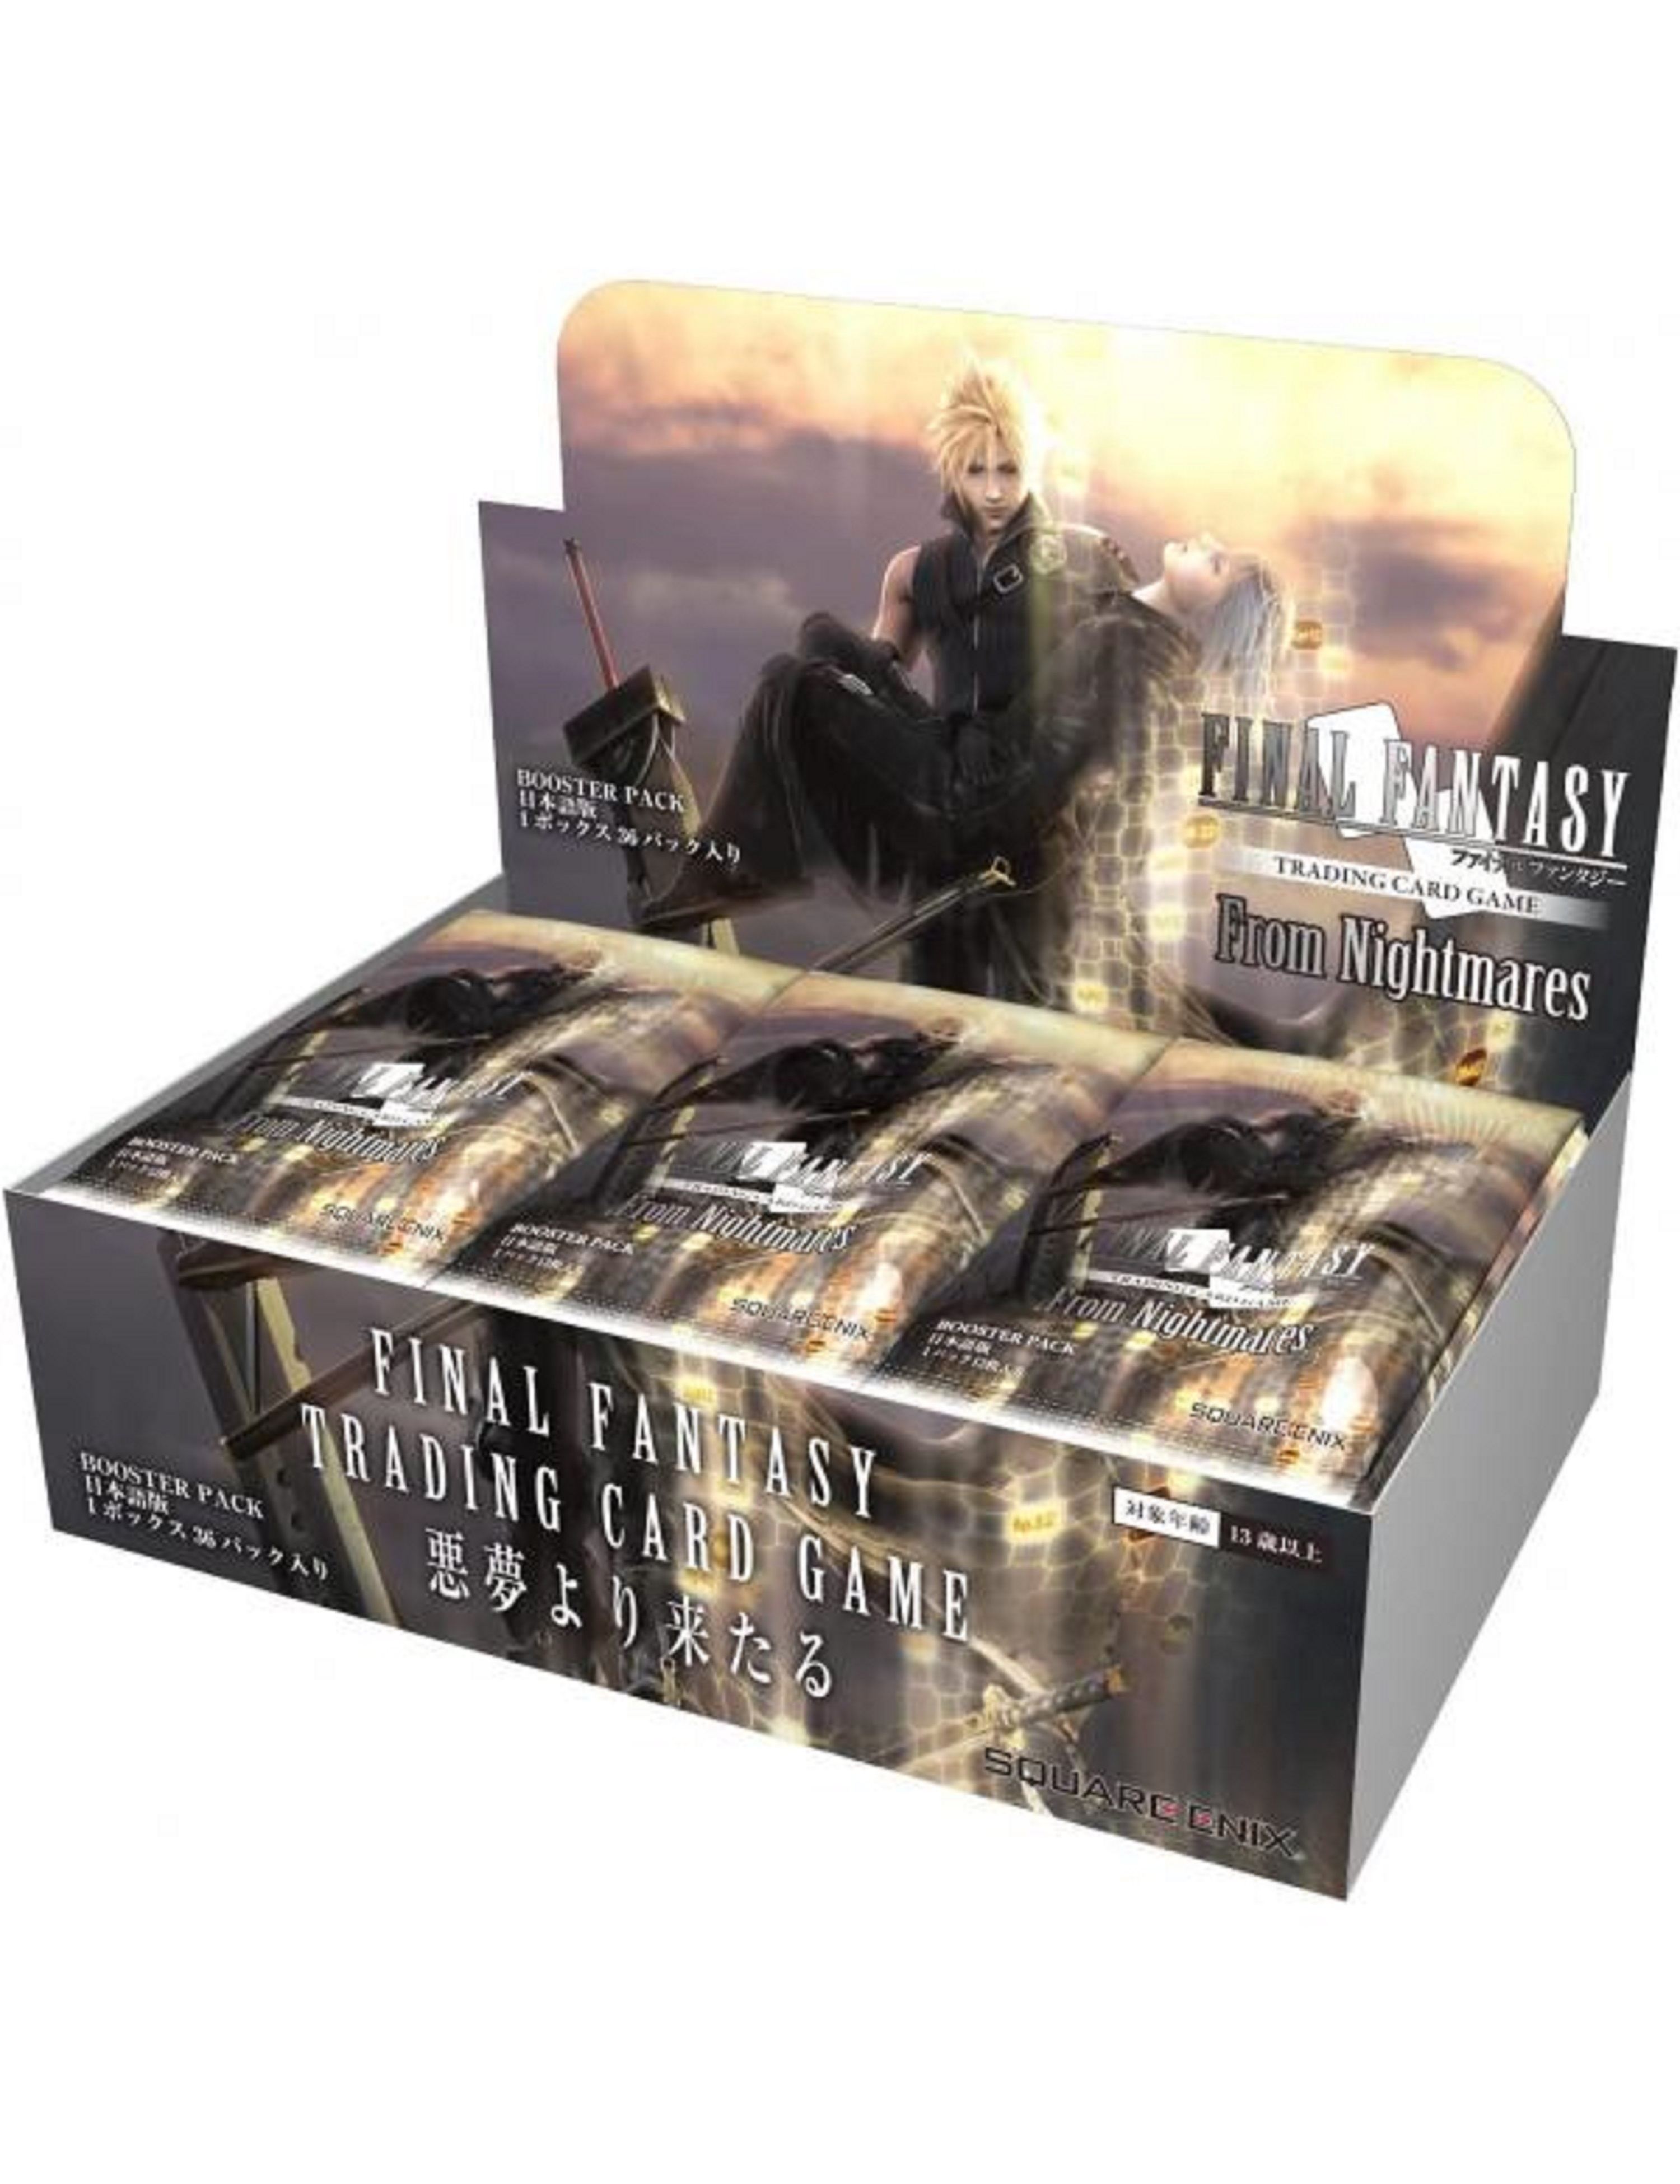 Final Fantasy Trading Card Game Booster Pack: From Nightmares 